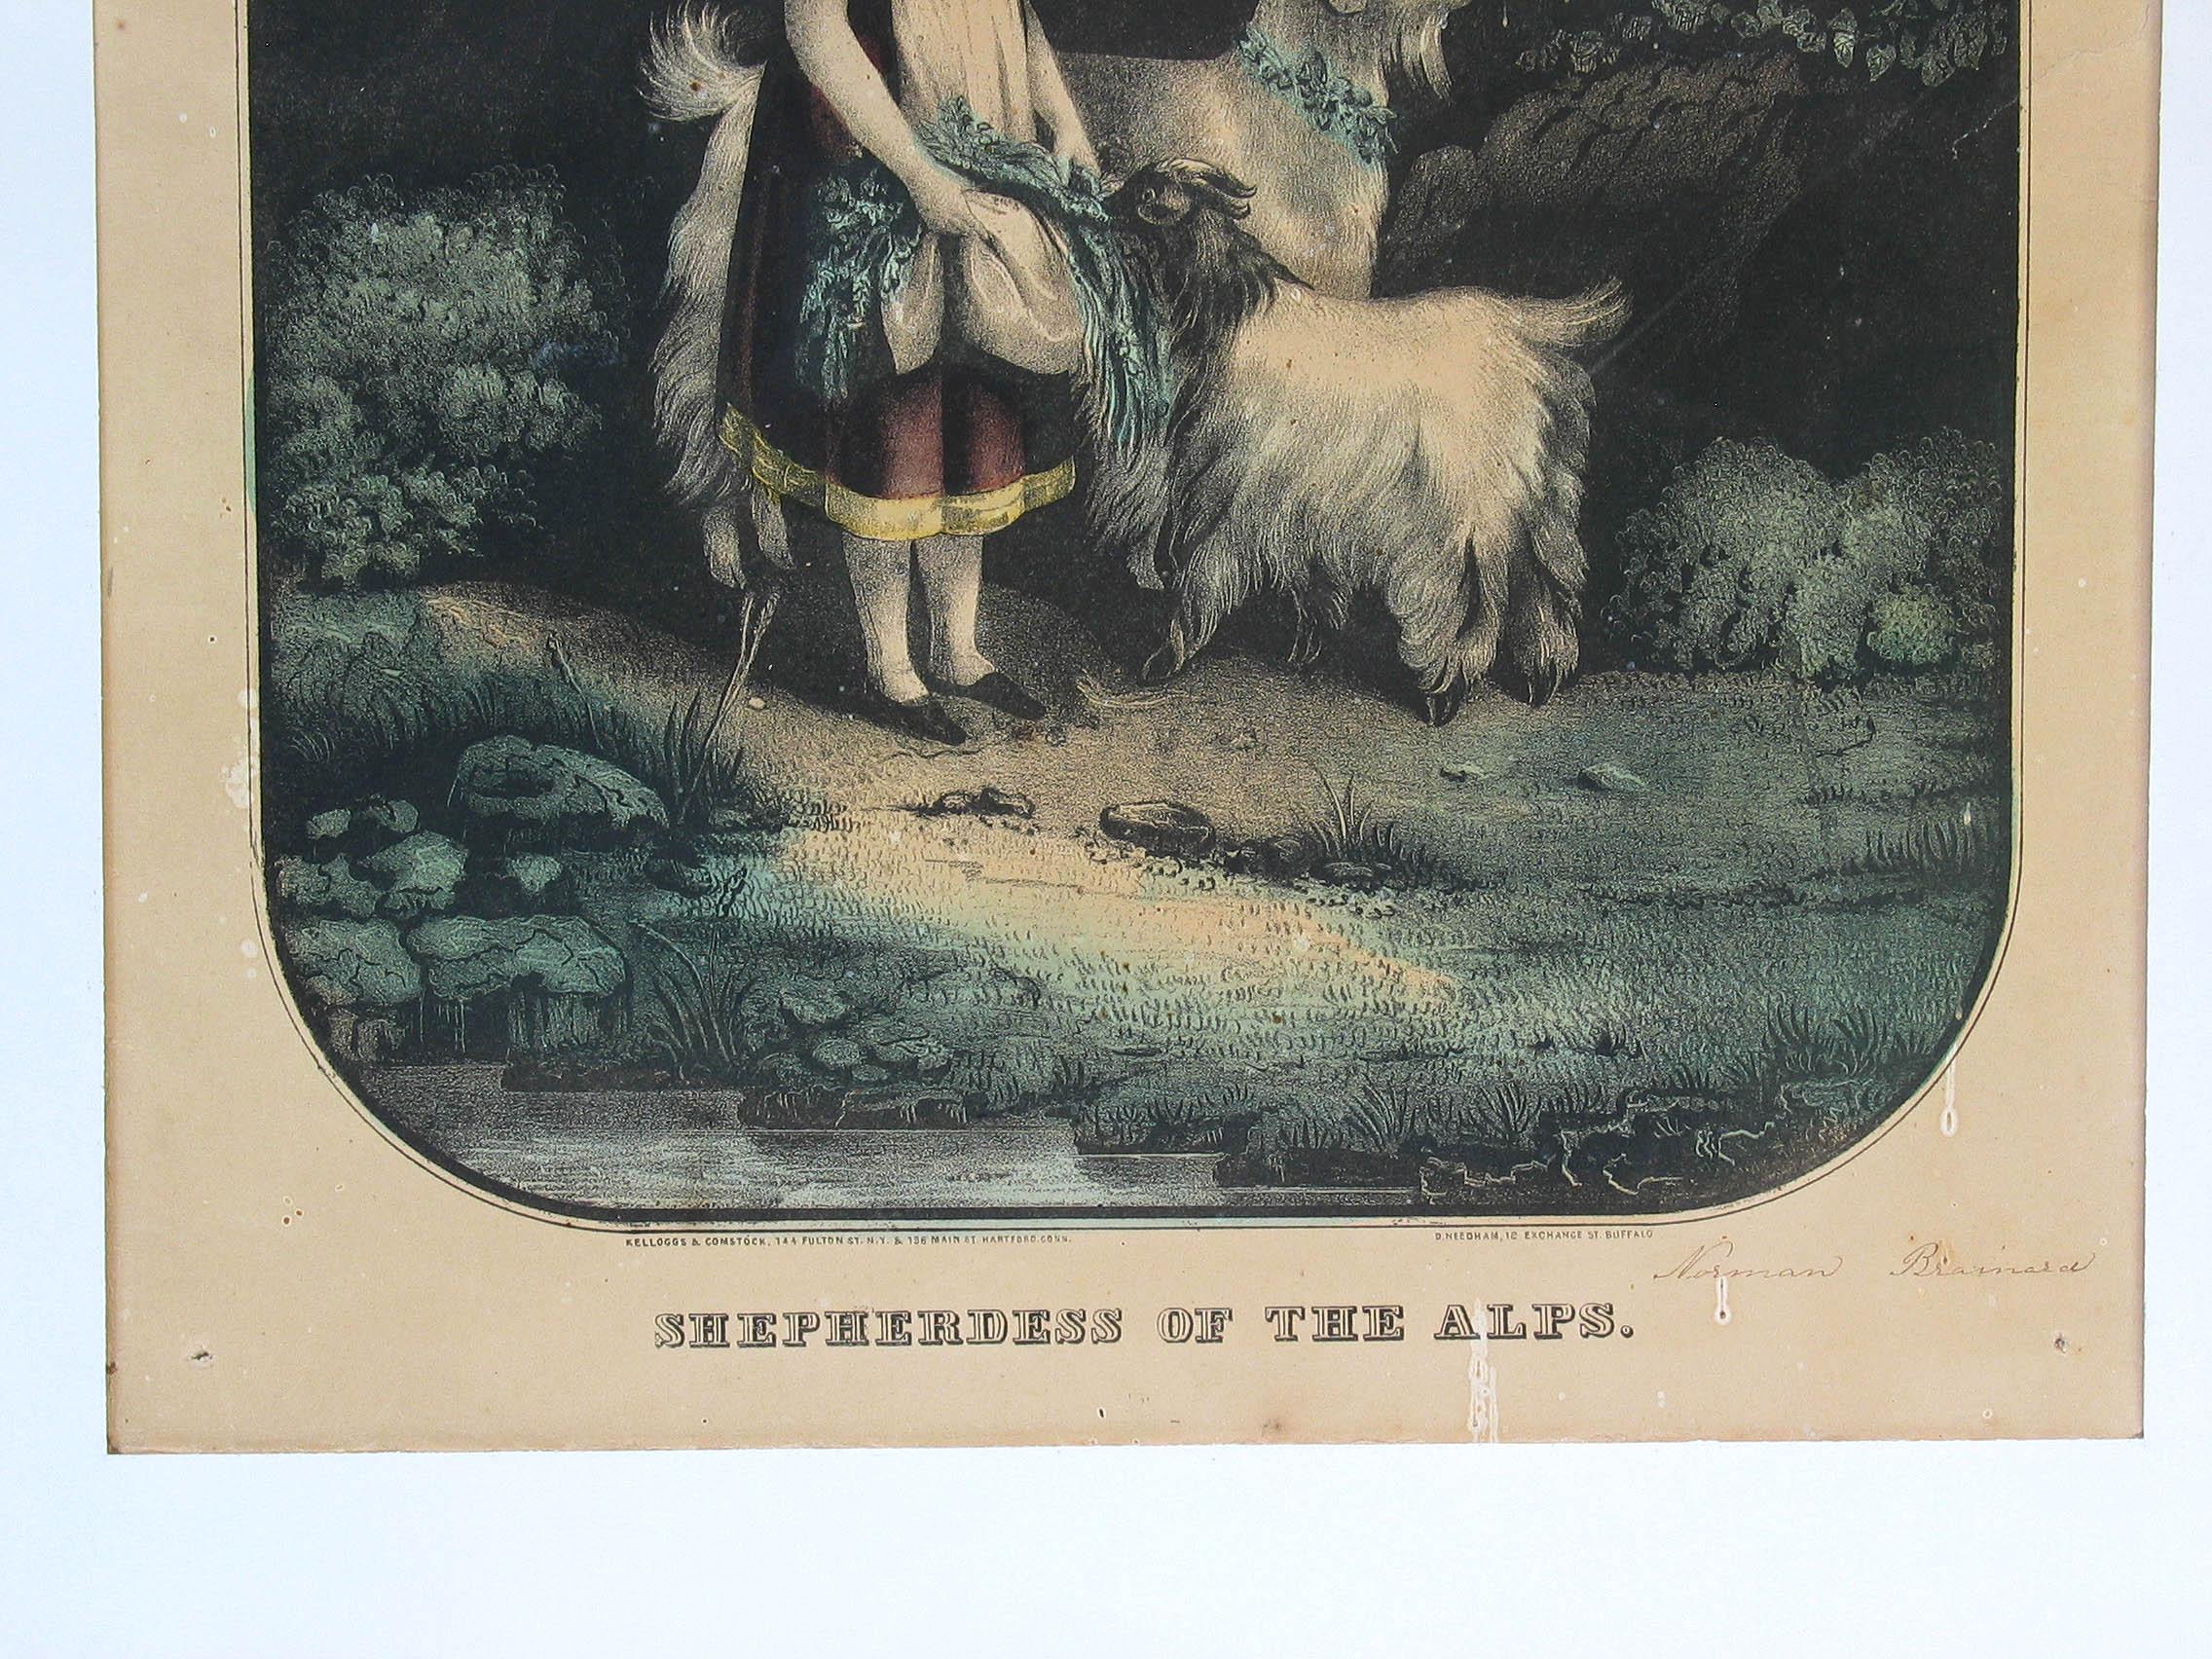 Mid-19th Century Original Kellogg & Comstock Hand-Colored Lithograph 'Shepherdess of the Alps' For Sale